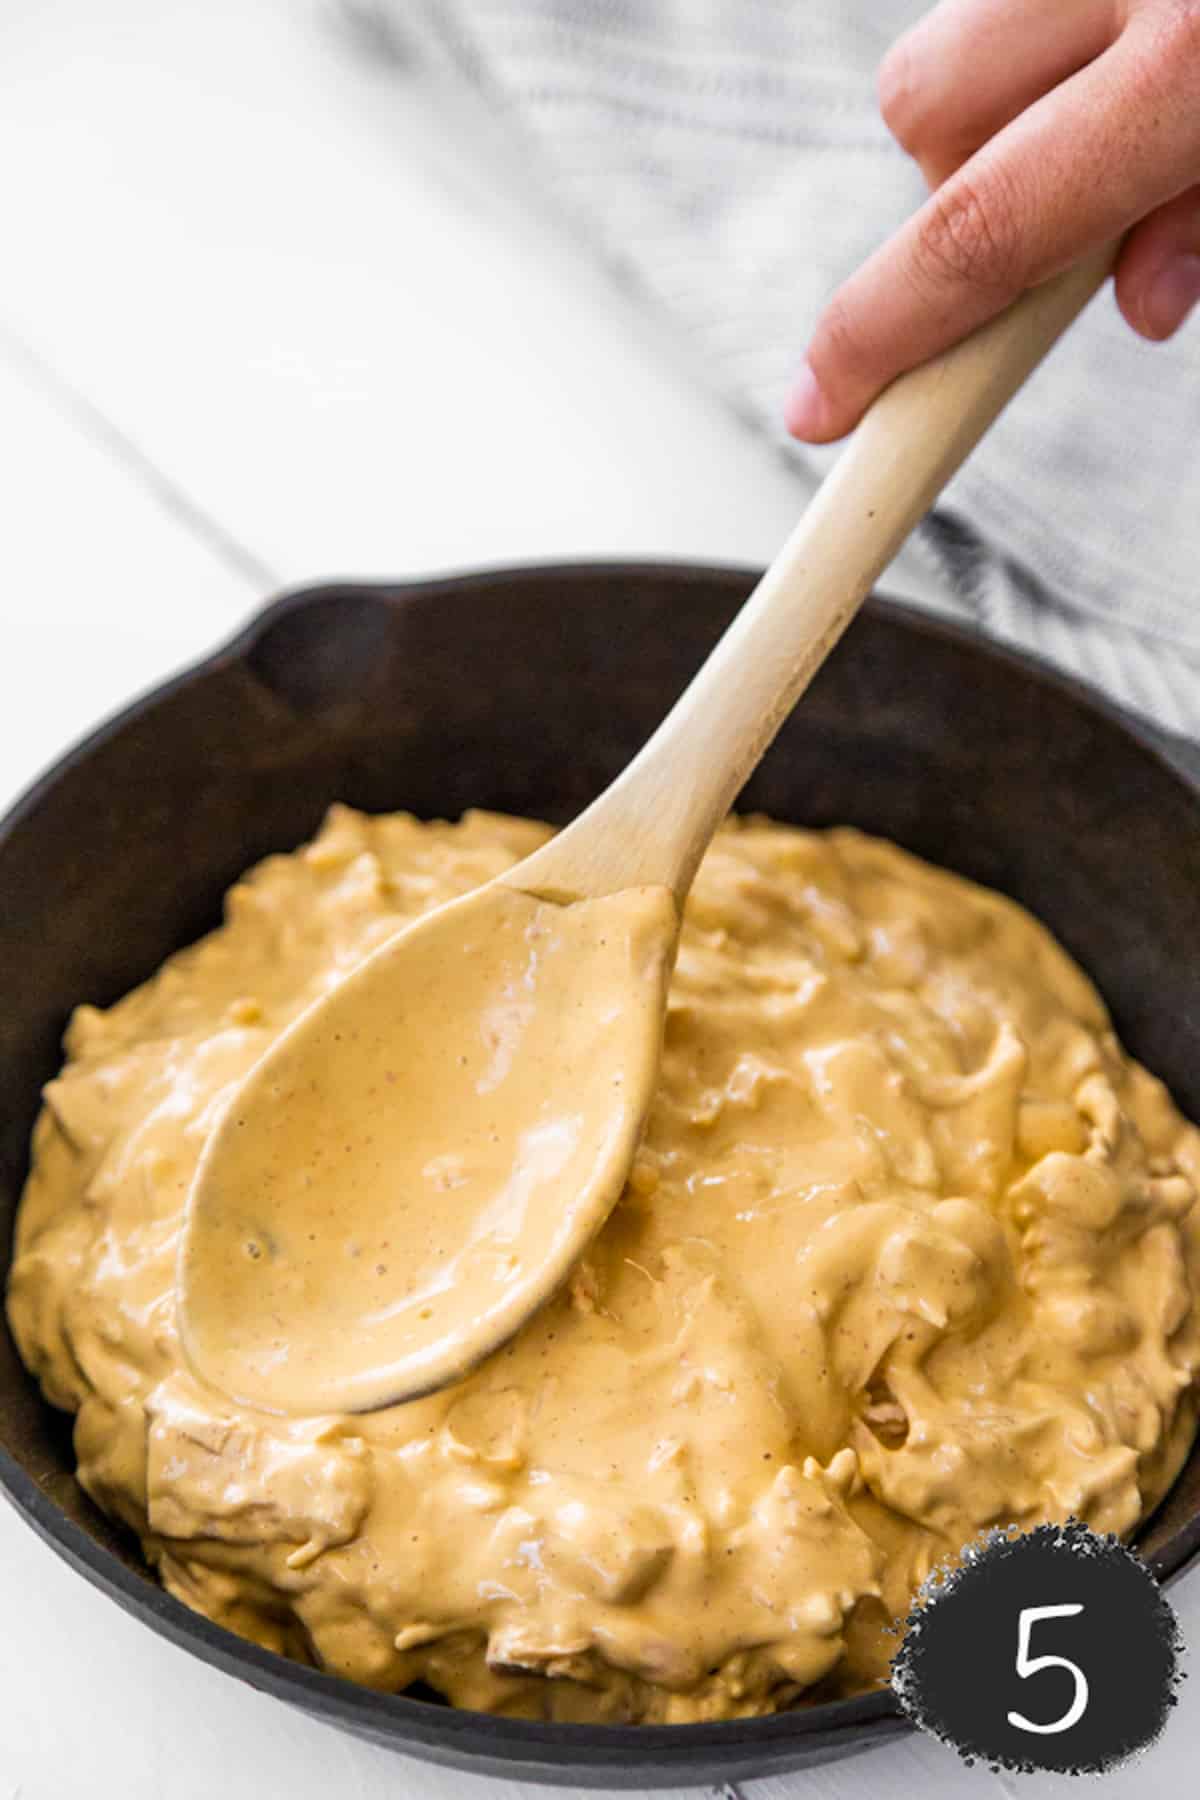 A hand holding a wooden spoon spreading buffalo chicken dip evenly into a cast iron skillet.